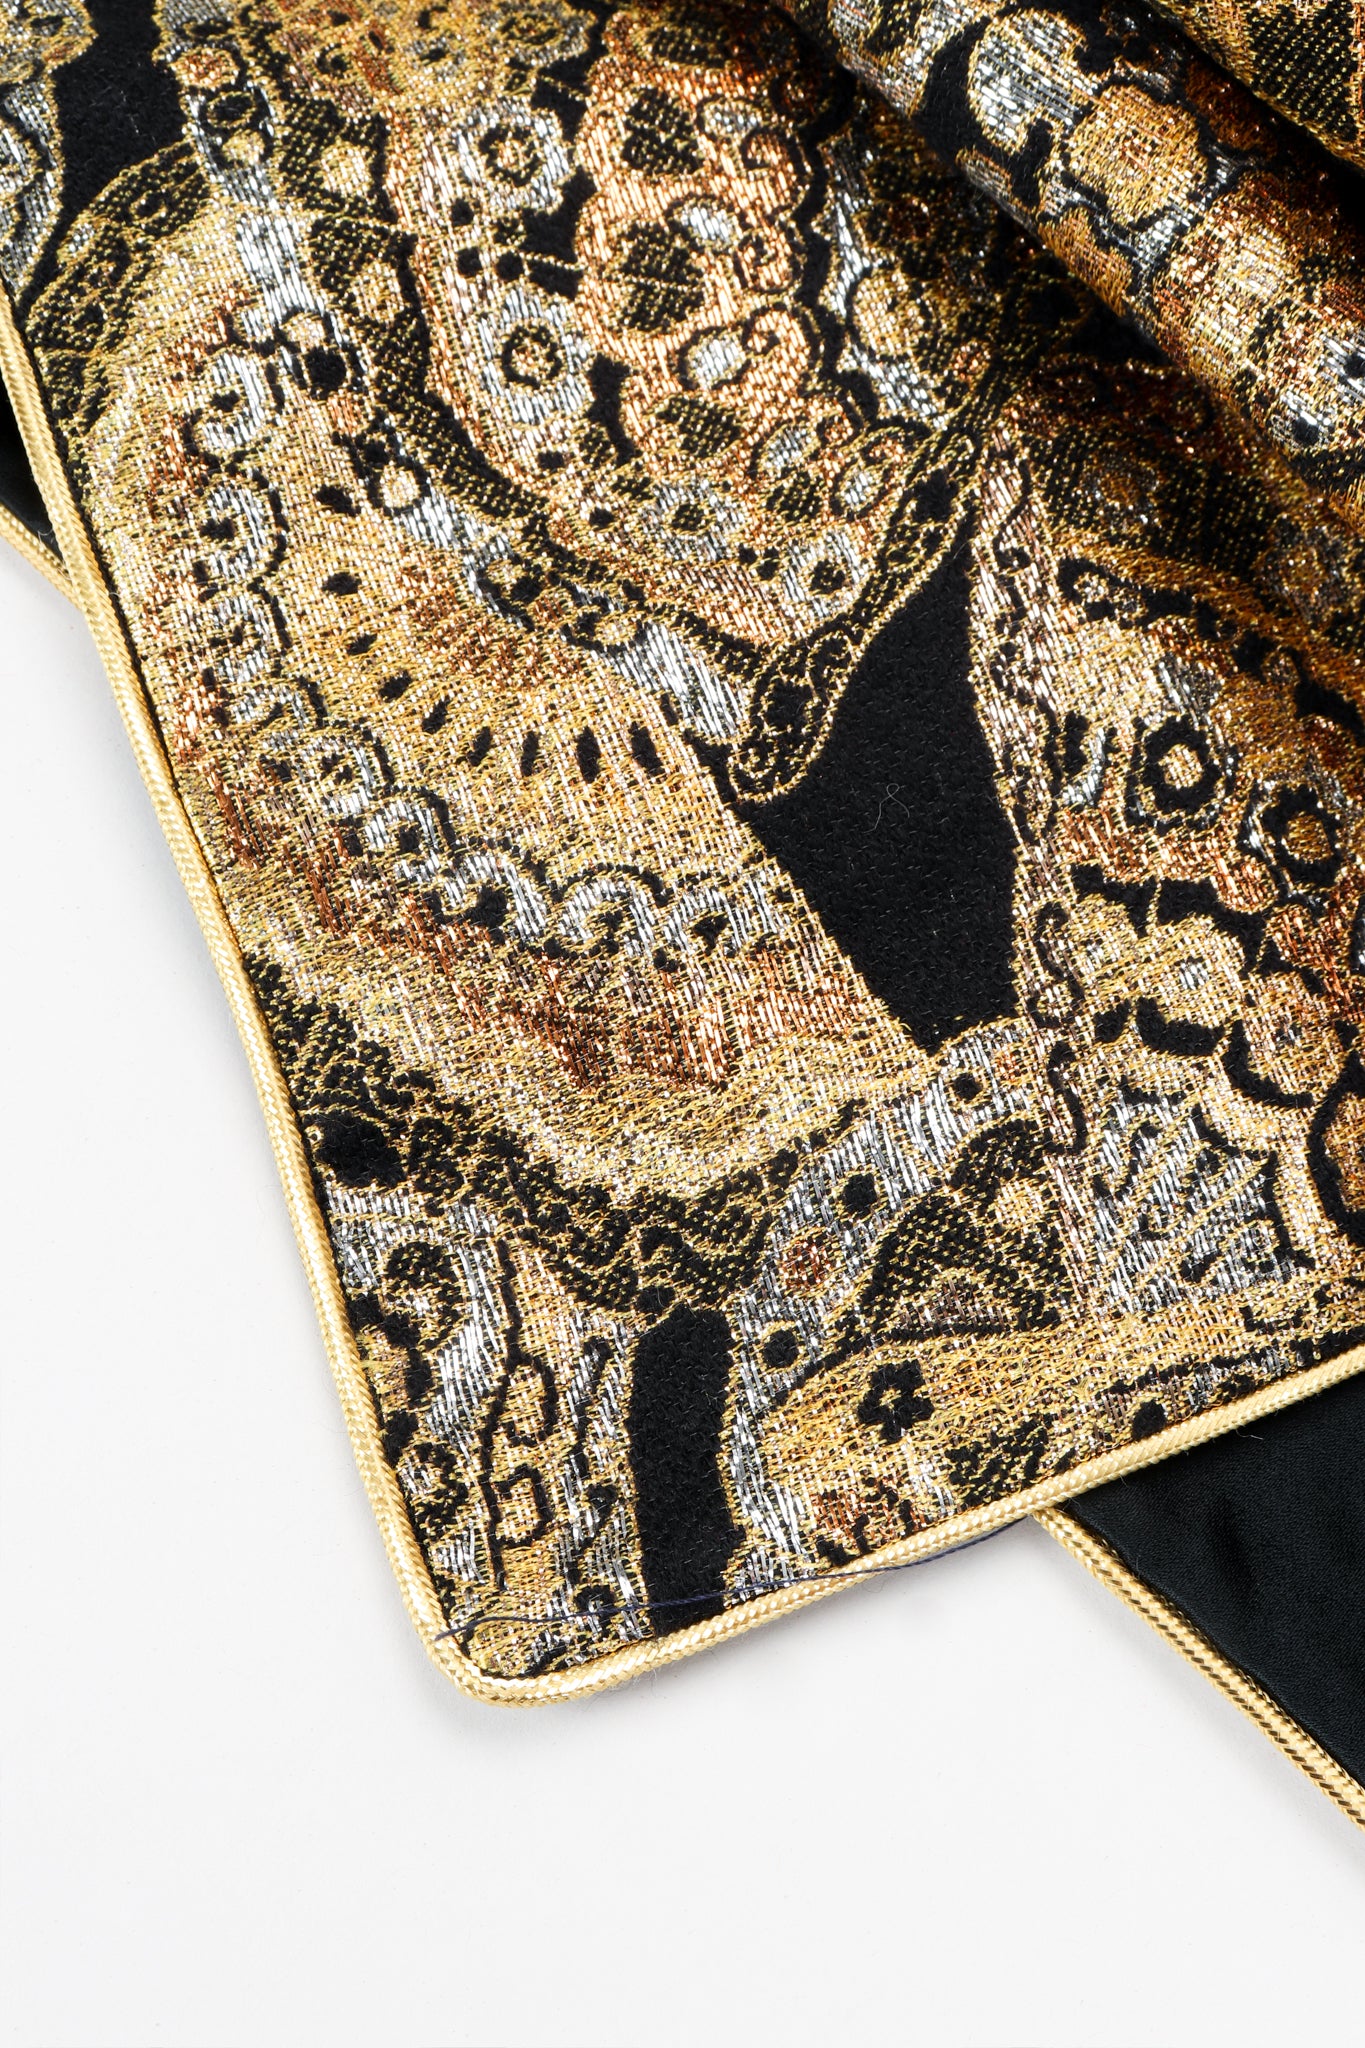 Vintage Anthony Muto Golden Brocade Fan Coccon Coat sleeve detail